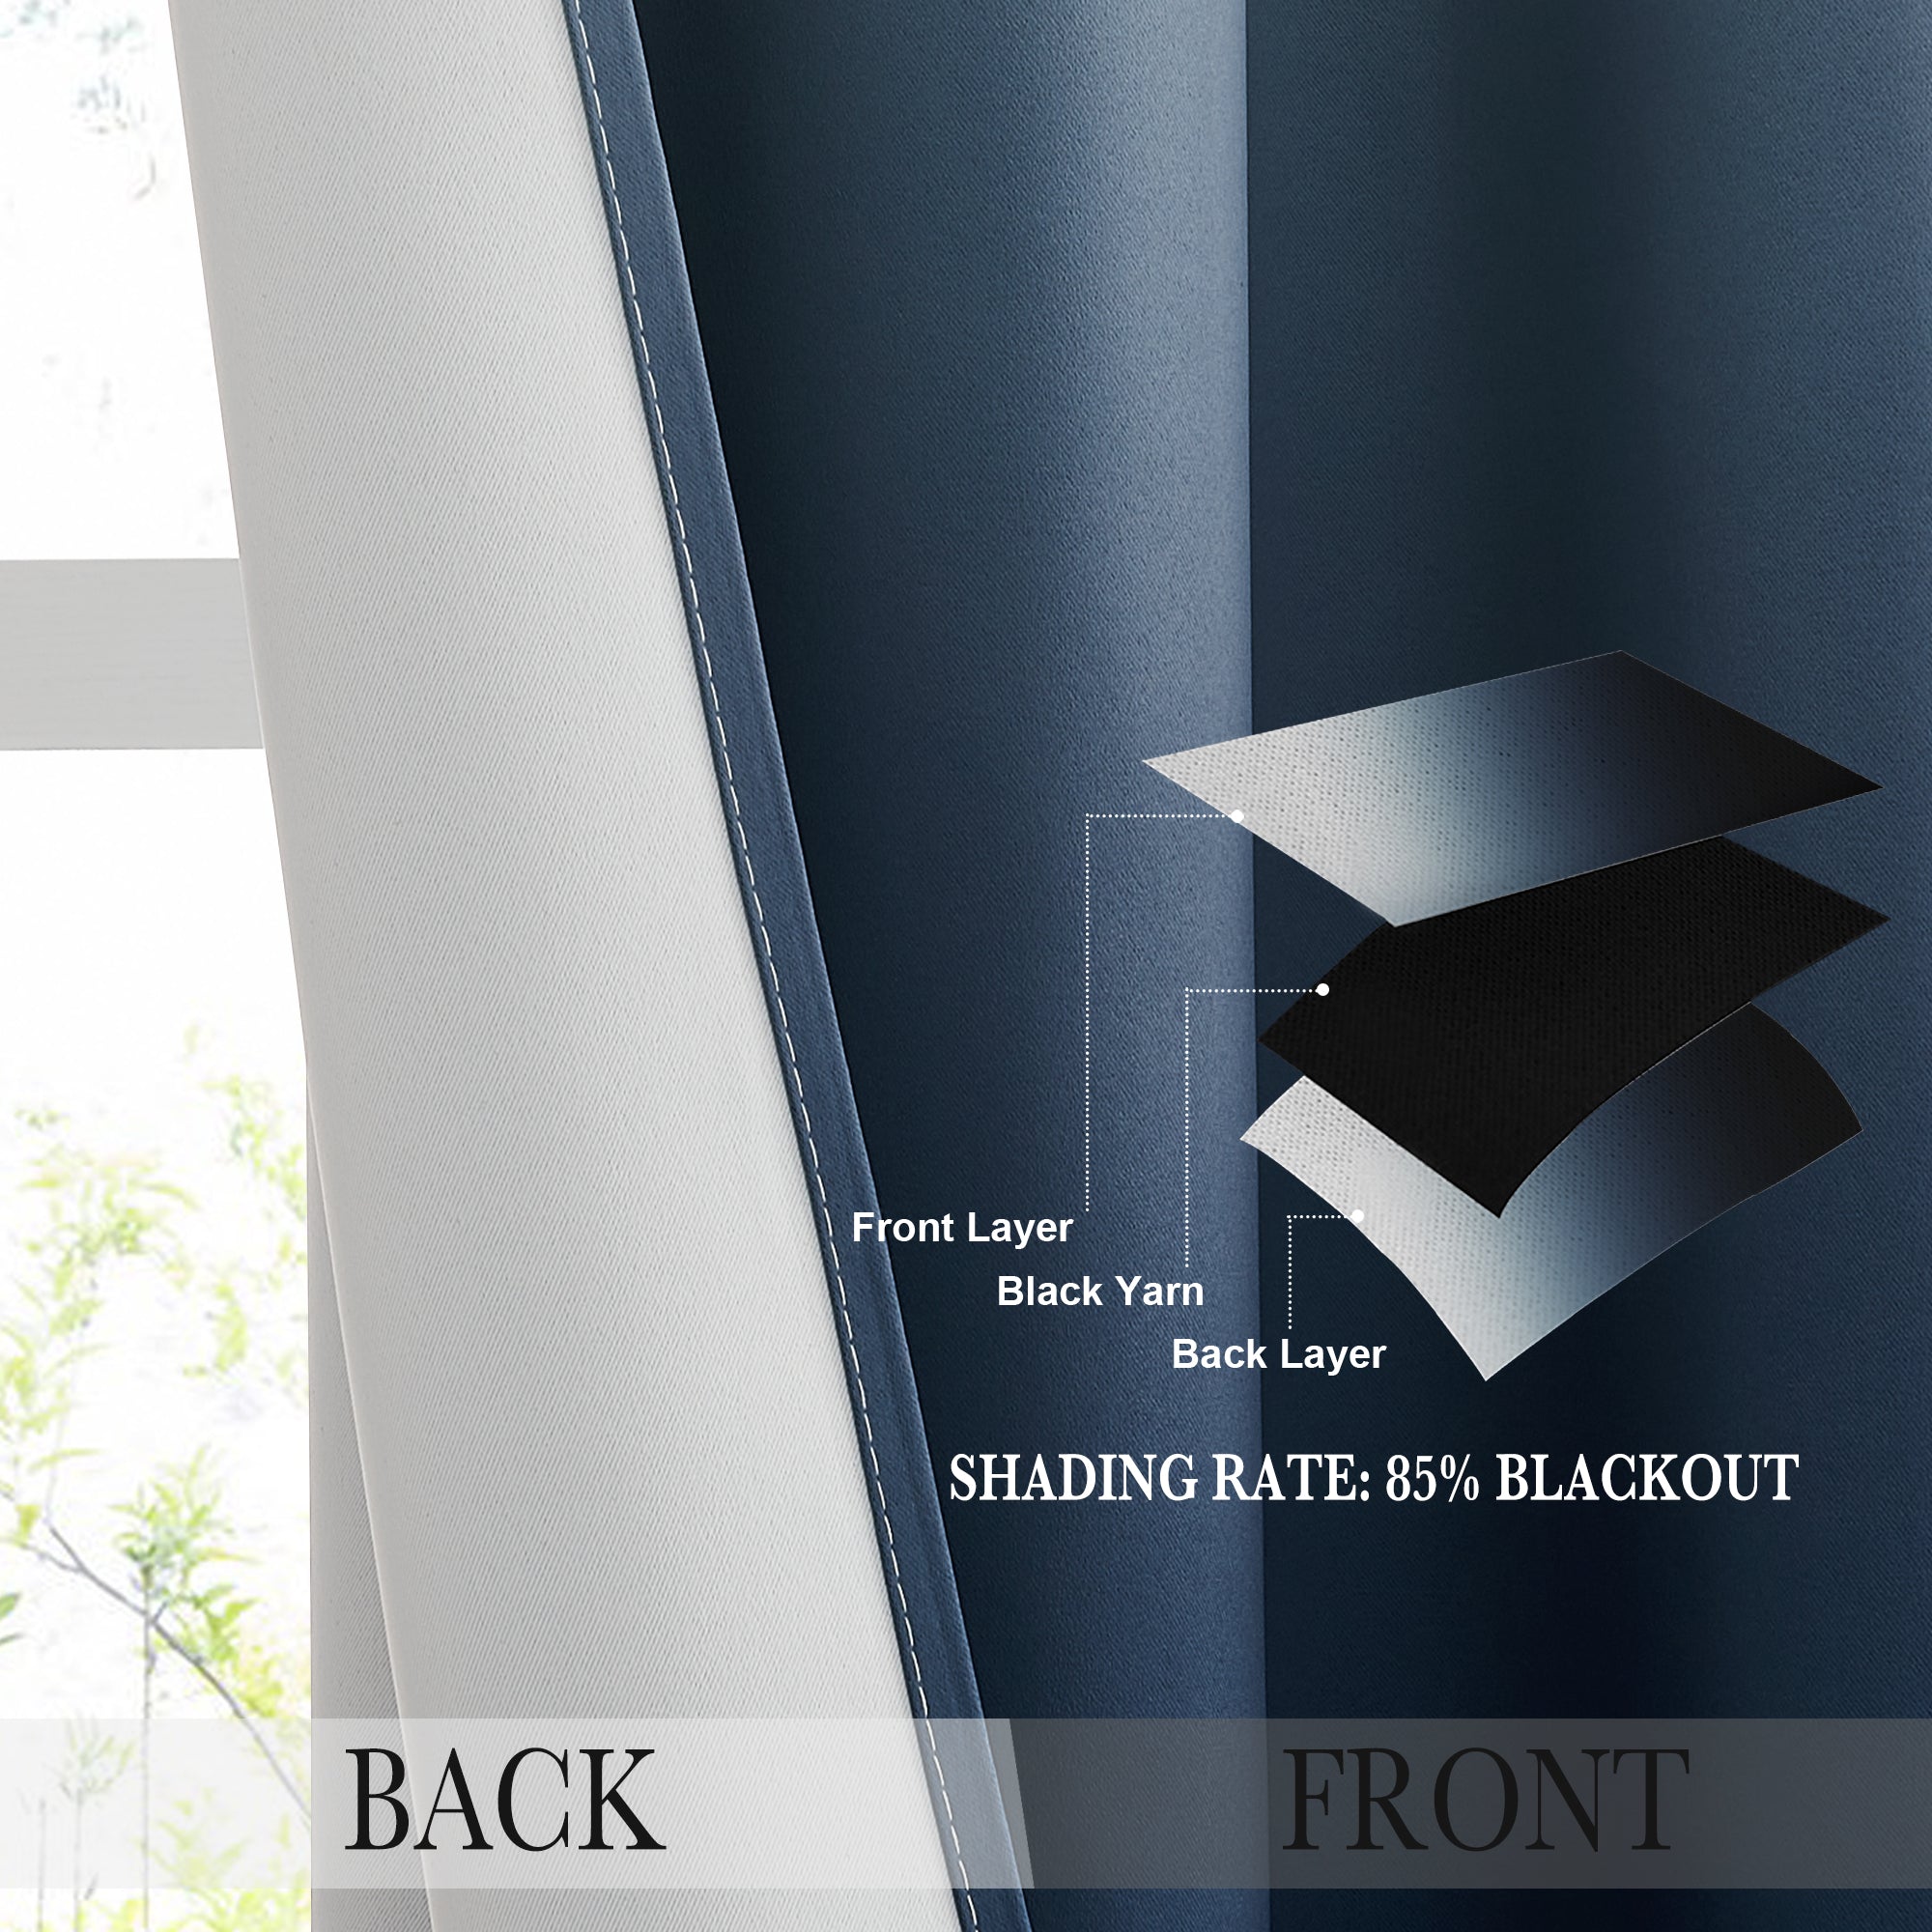 Grommet Ombre Blackout Privacy Curtain For Living Room 2 Panels KGORGE Store